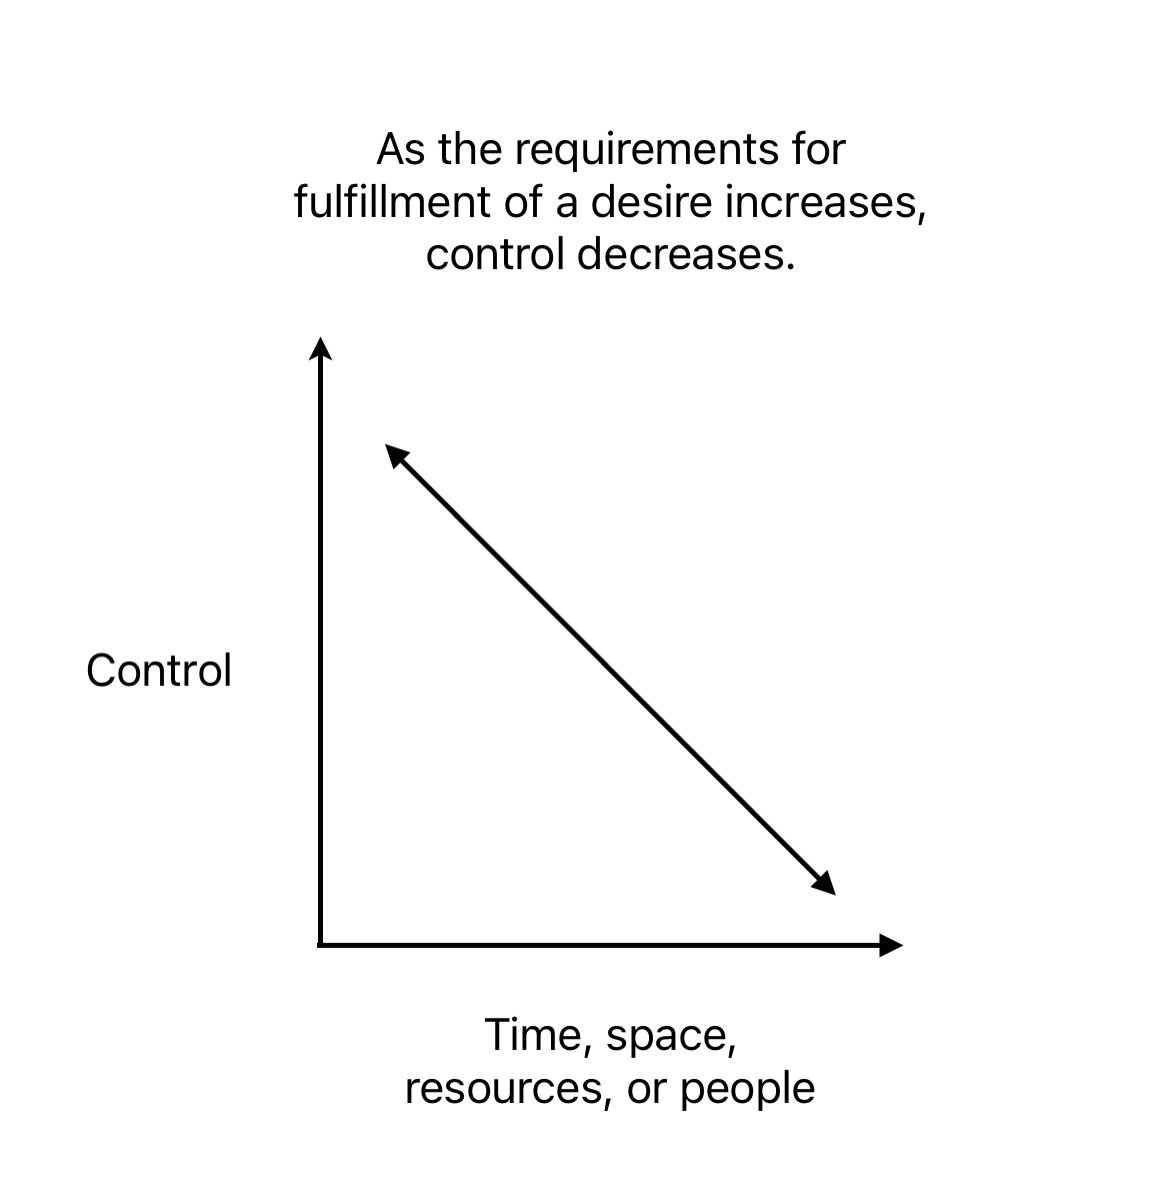 a graph of the inverse relationship of control to the requirements for fulfillment of desires. As the requirements for fulfillment of a desire increases, control decreases.